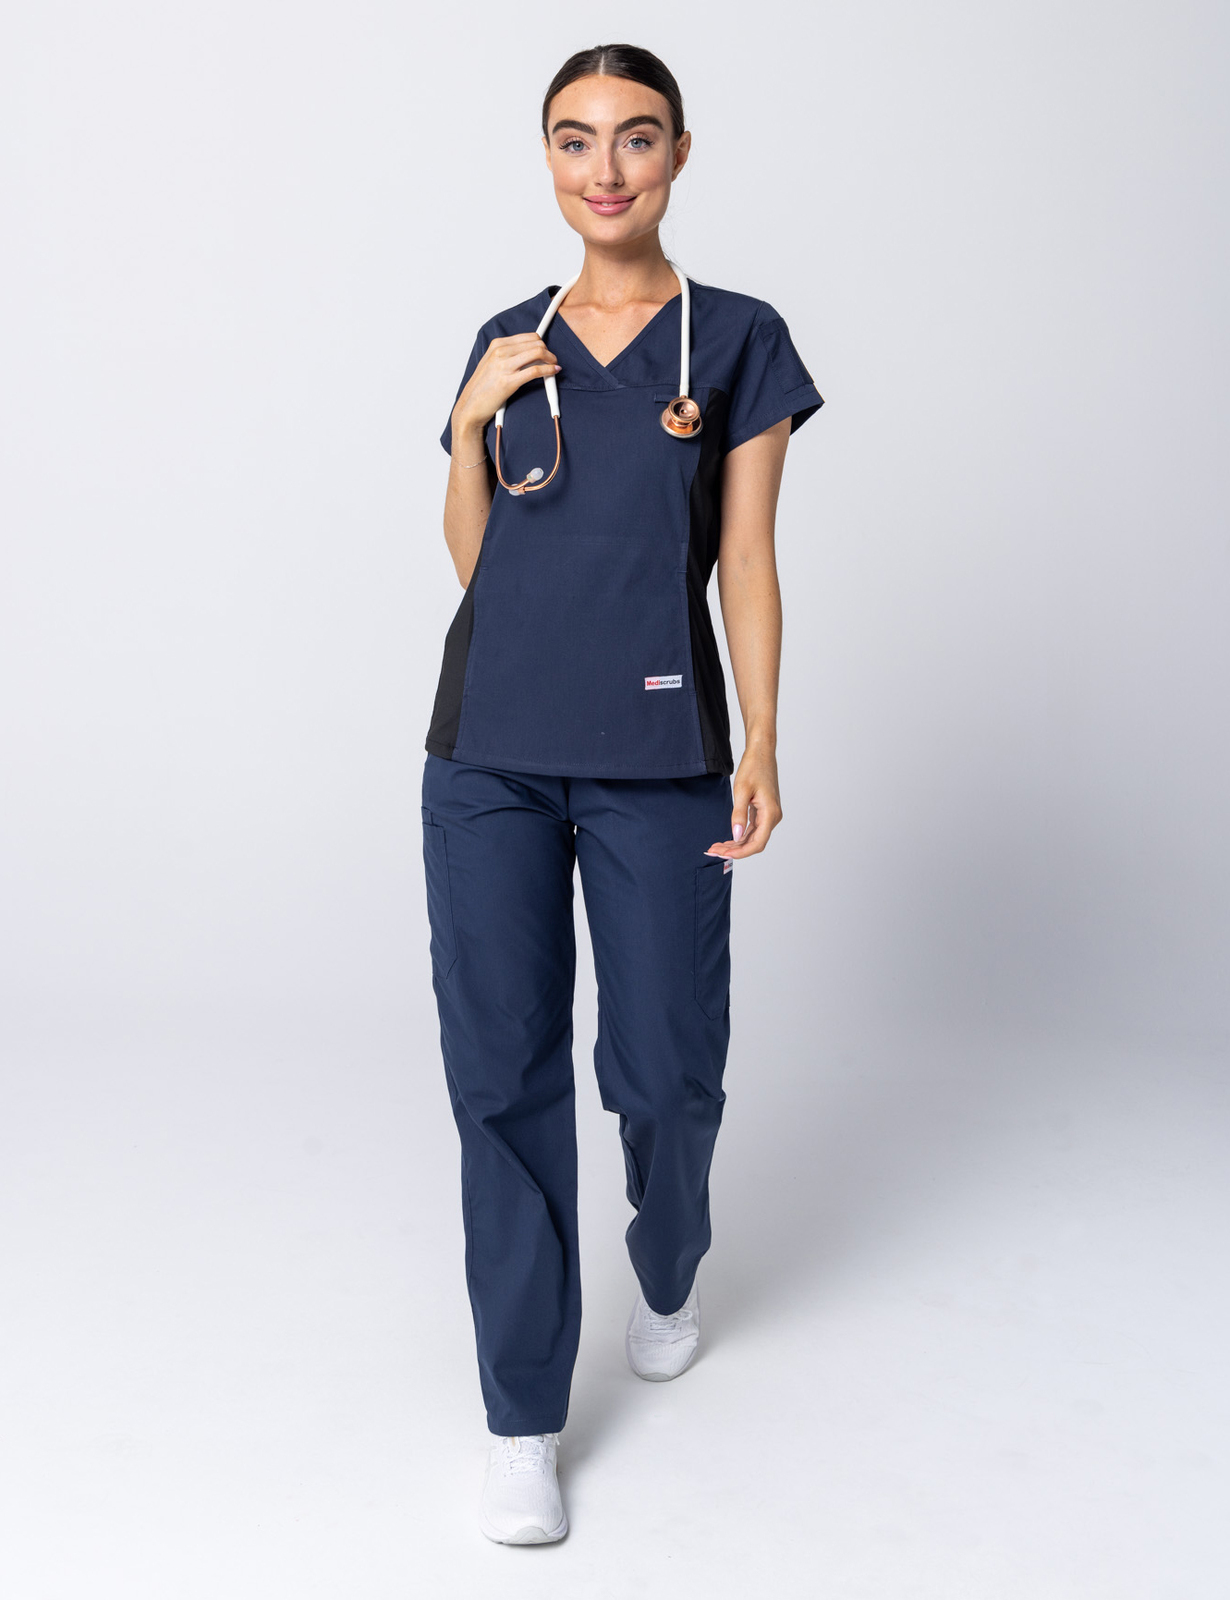 Women's Fit Solid Scrub Top With Spandex Panel - Navy - 5X Large